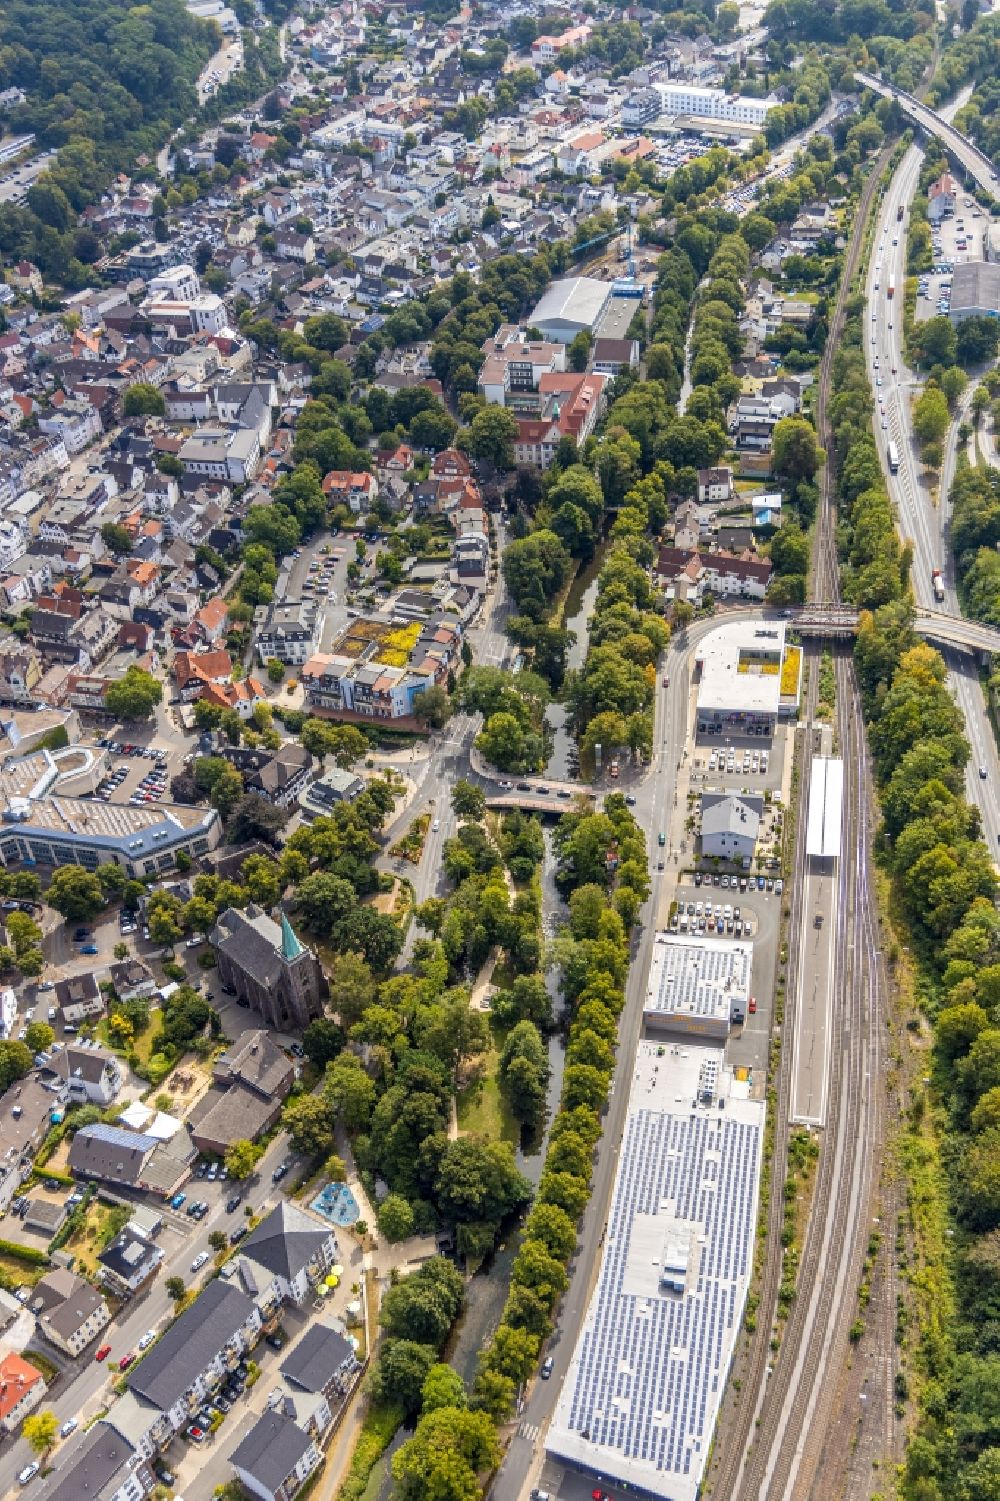 Aerial photograph Menden (Sauerland) - Church building of the Heilig-Geist-Kirche at the industrial area along the course of the river Henne on the streets Untere Promenade and Bodelschwinghstrasse in Menden (Sauerland) in the state North Rhine-Westphalia, Germany